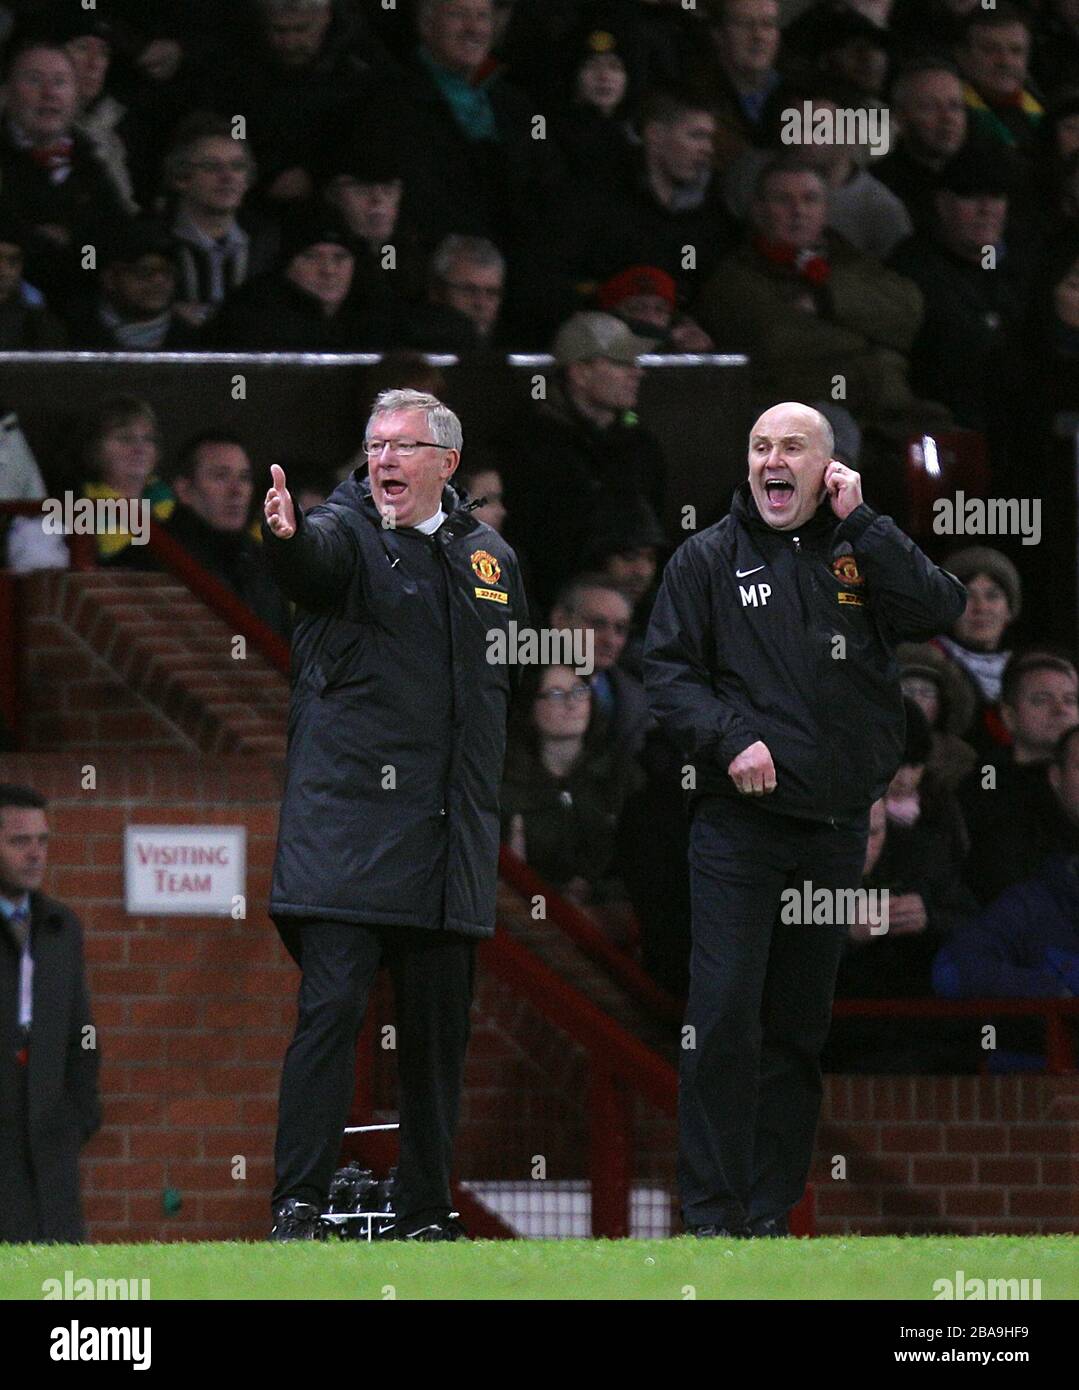 Manchester United manager Sir Alex Ferguson (left) and his assistant Mike Phelan (right) gesture on the touchline Stock Photo